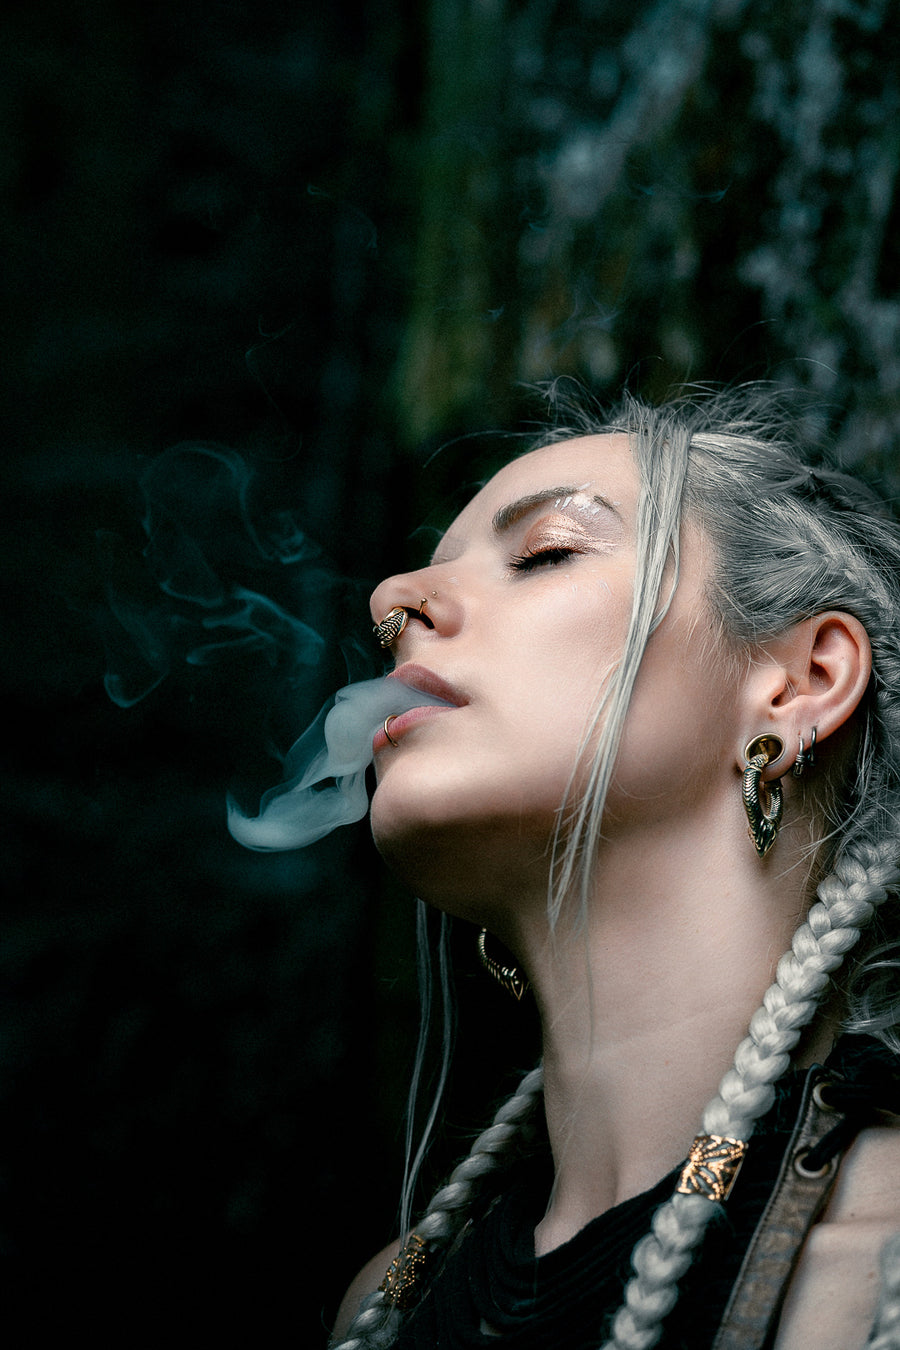 Woman exhaling smoke with closed eyes, wearing gold Xenomorph ear weights, emphasizing their fit and style.